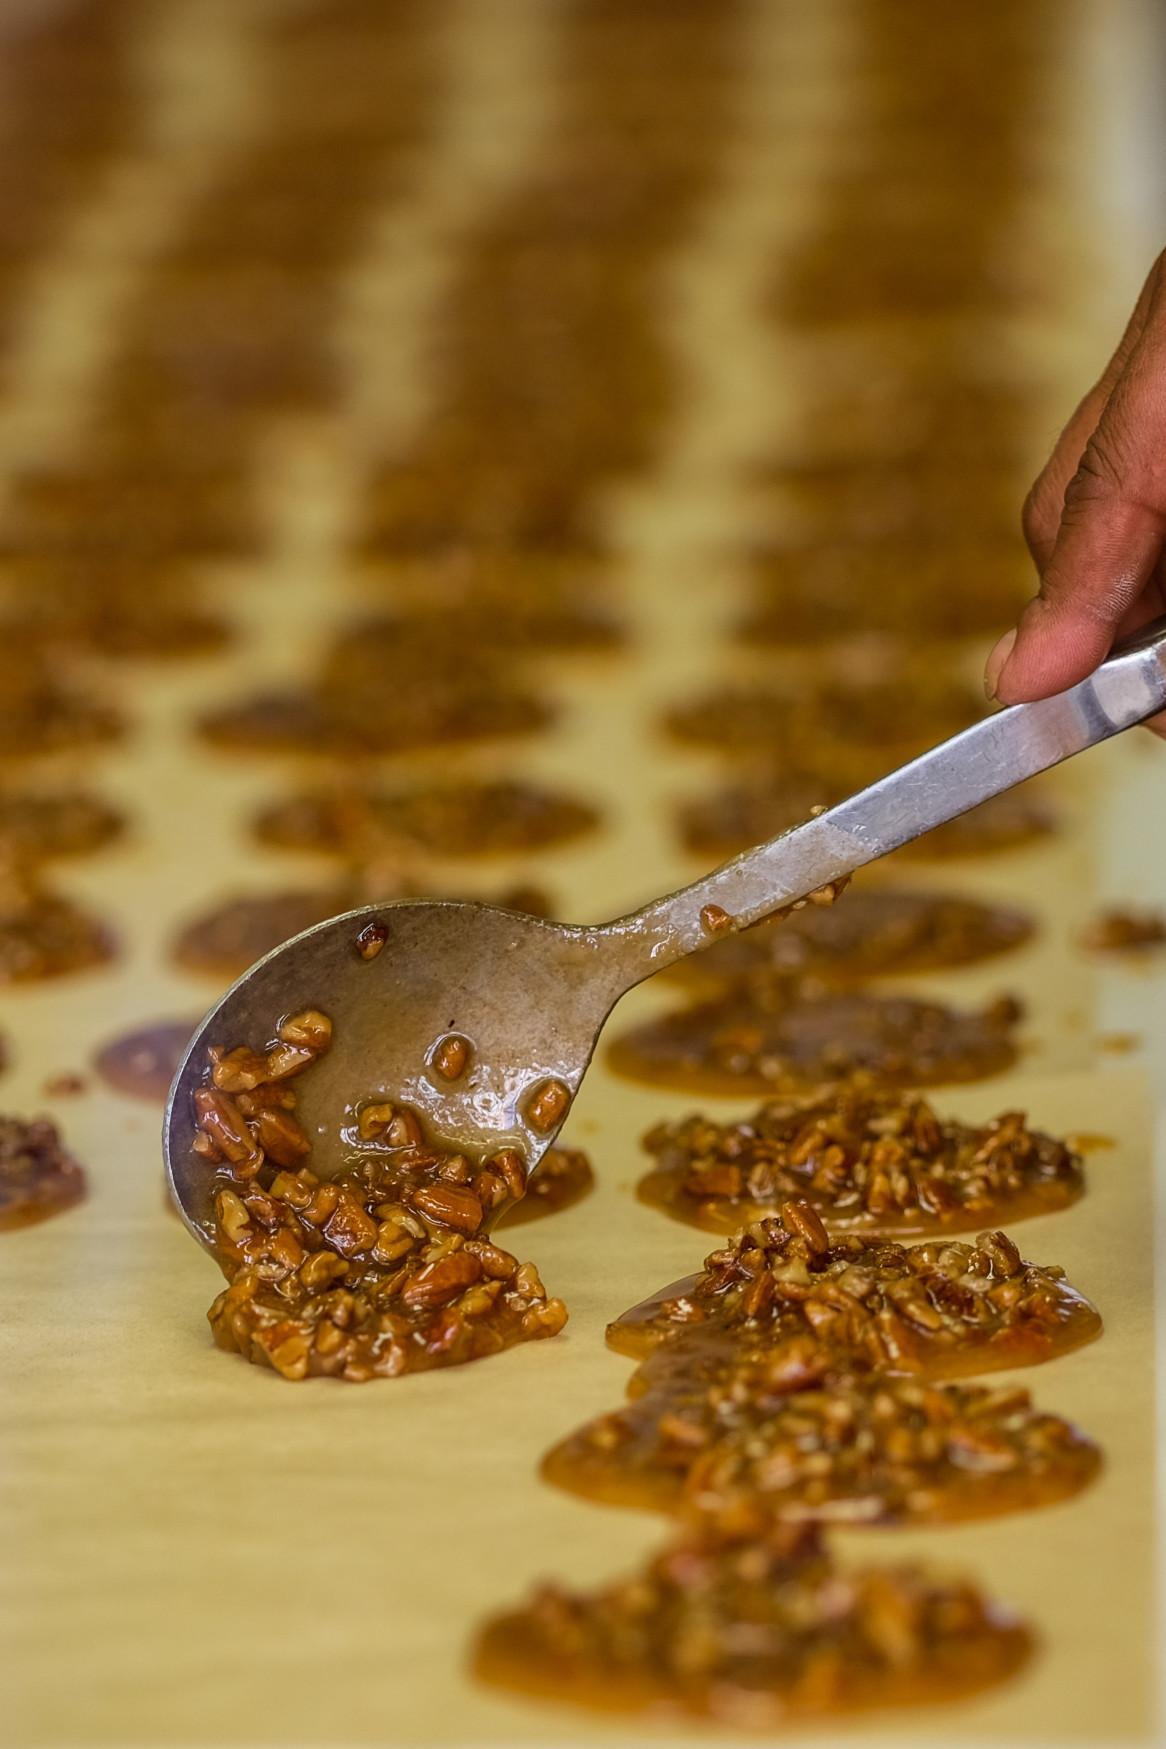 Praline's are grinded nuts boiled in sugar